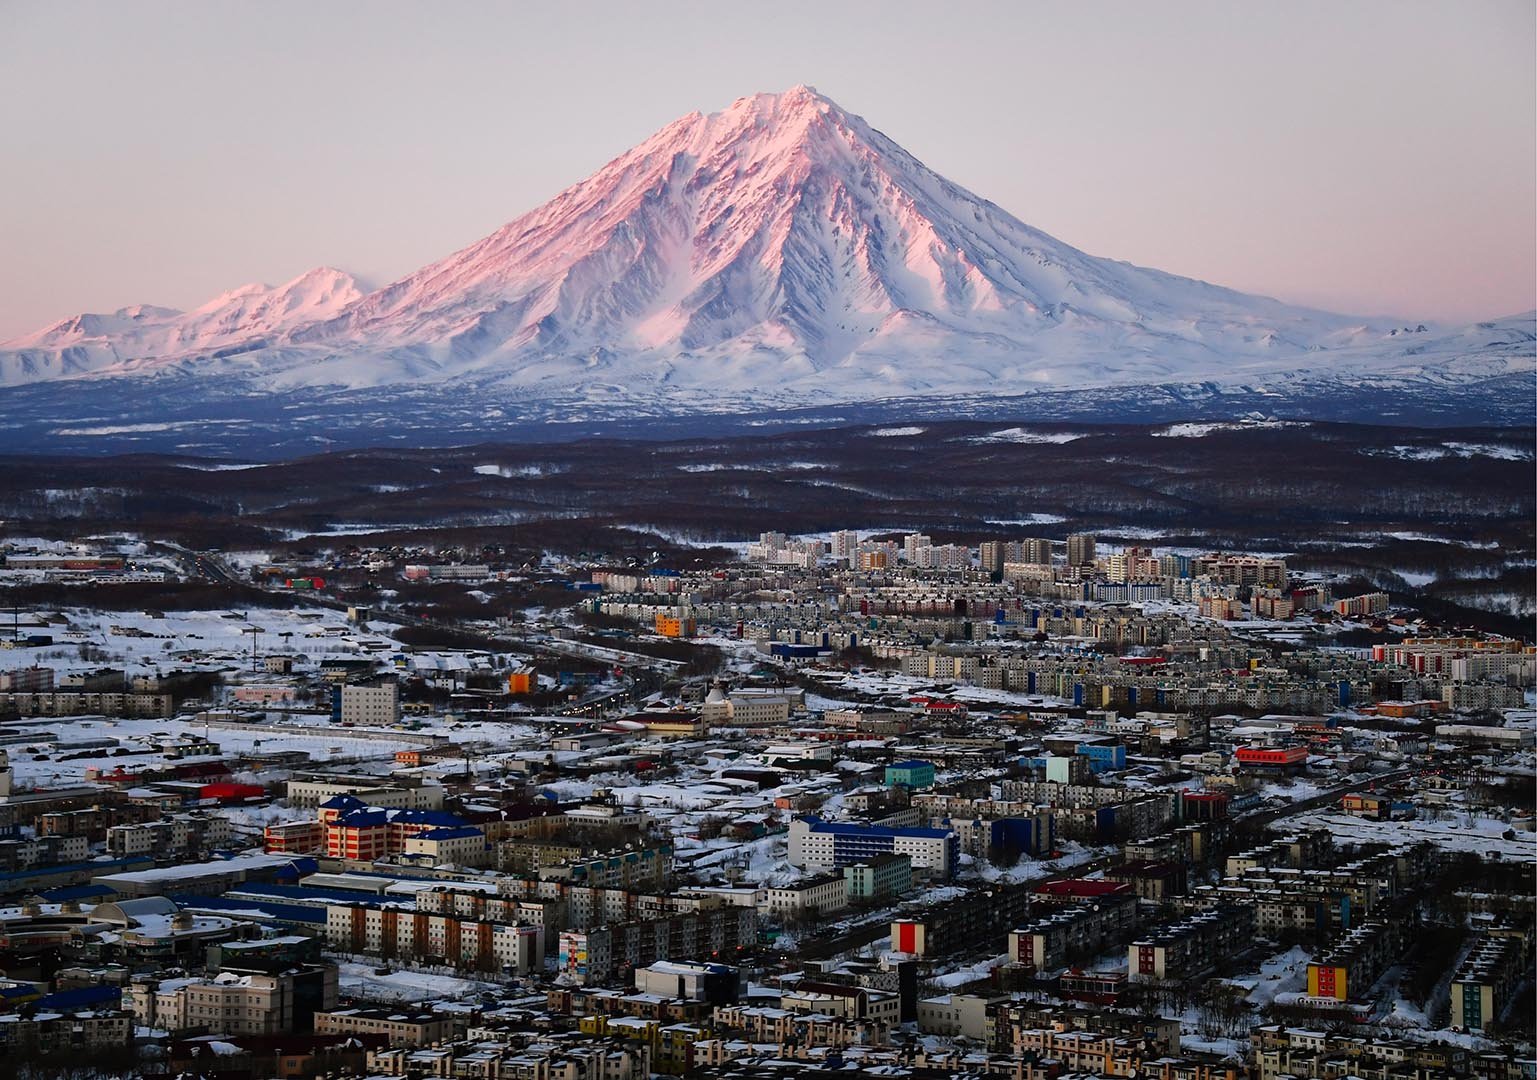 Kamchatka is in the of russia